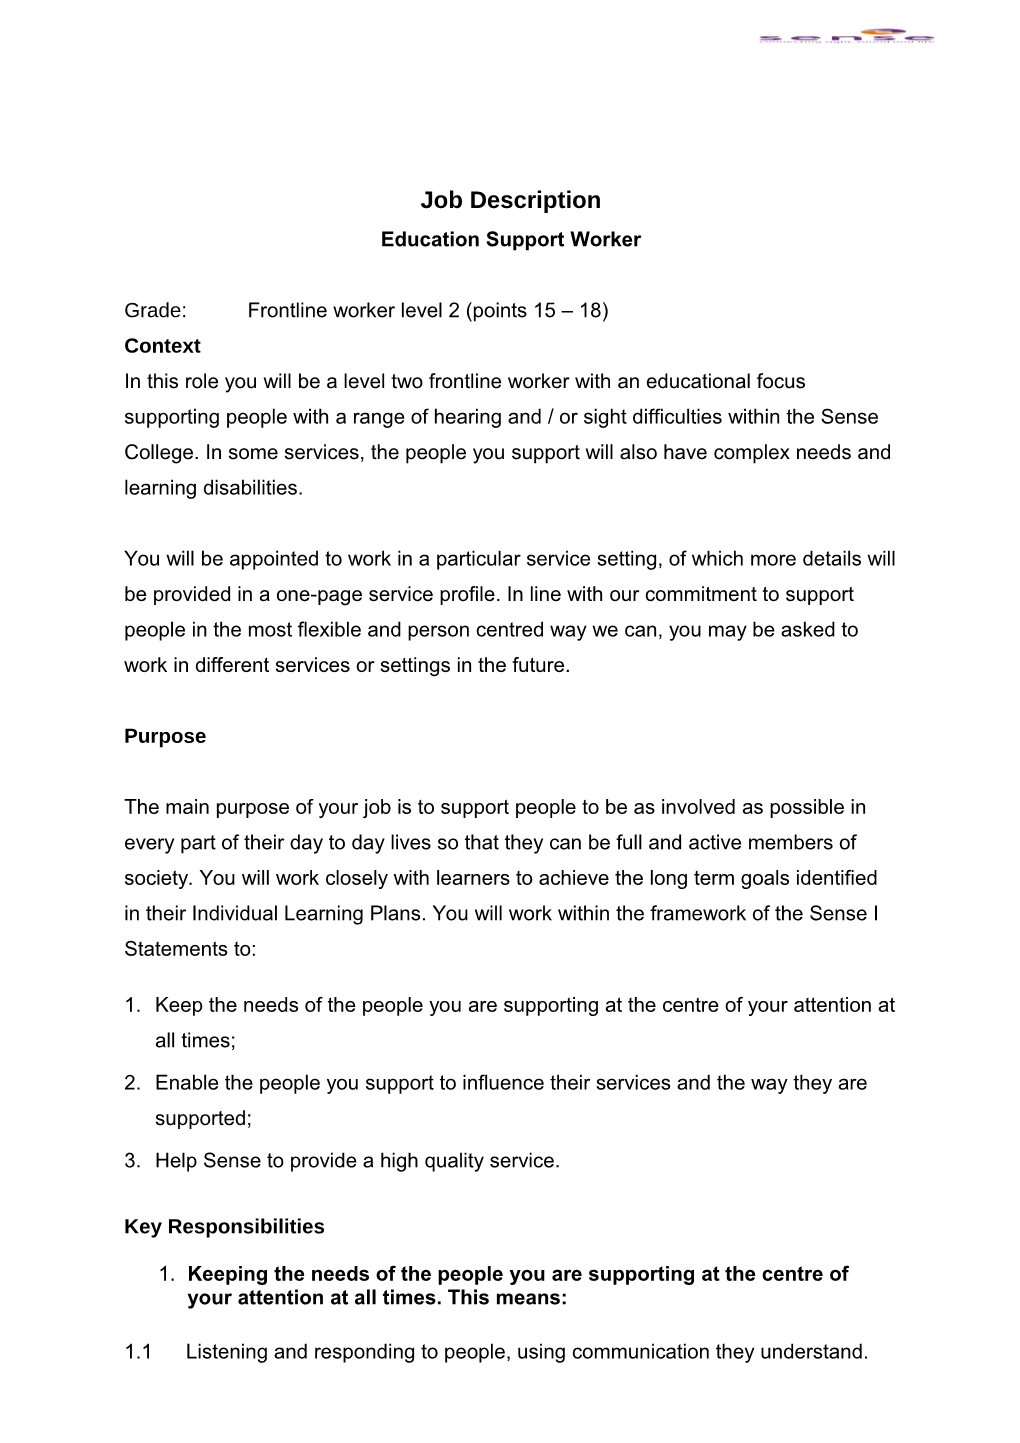 Education Support Worker